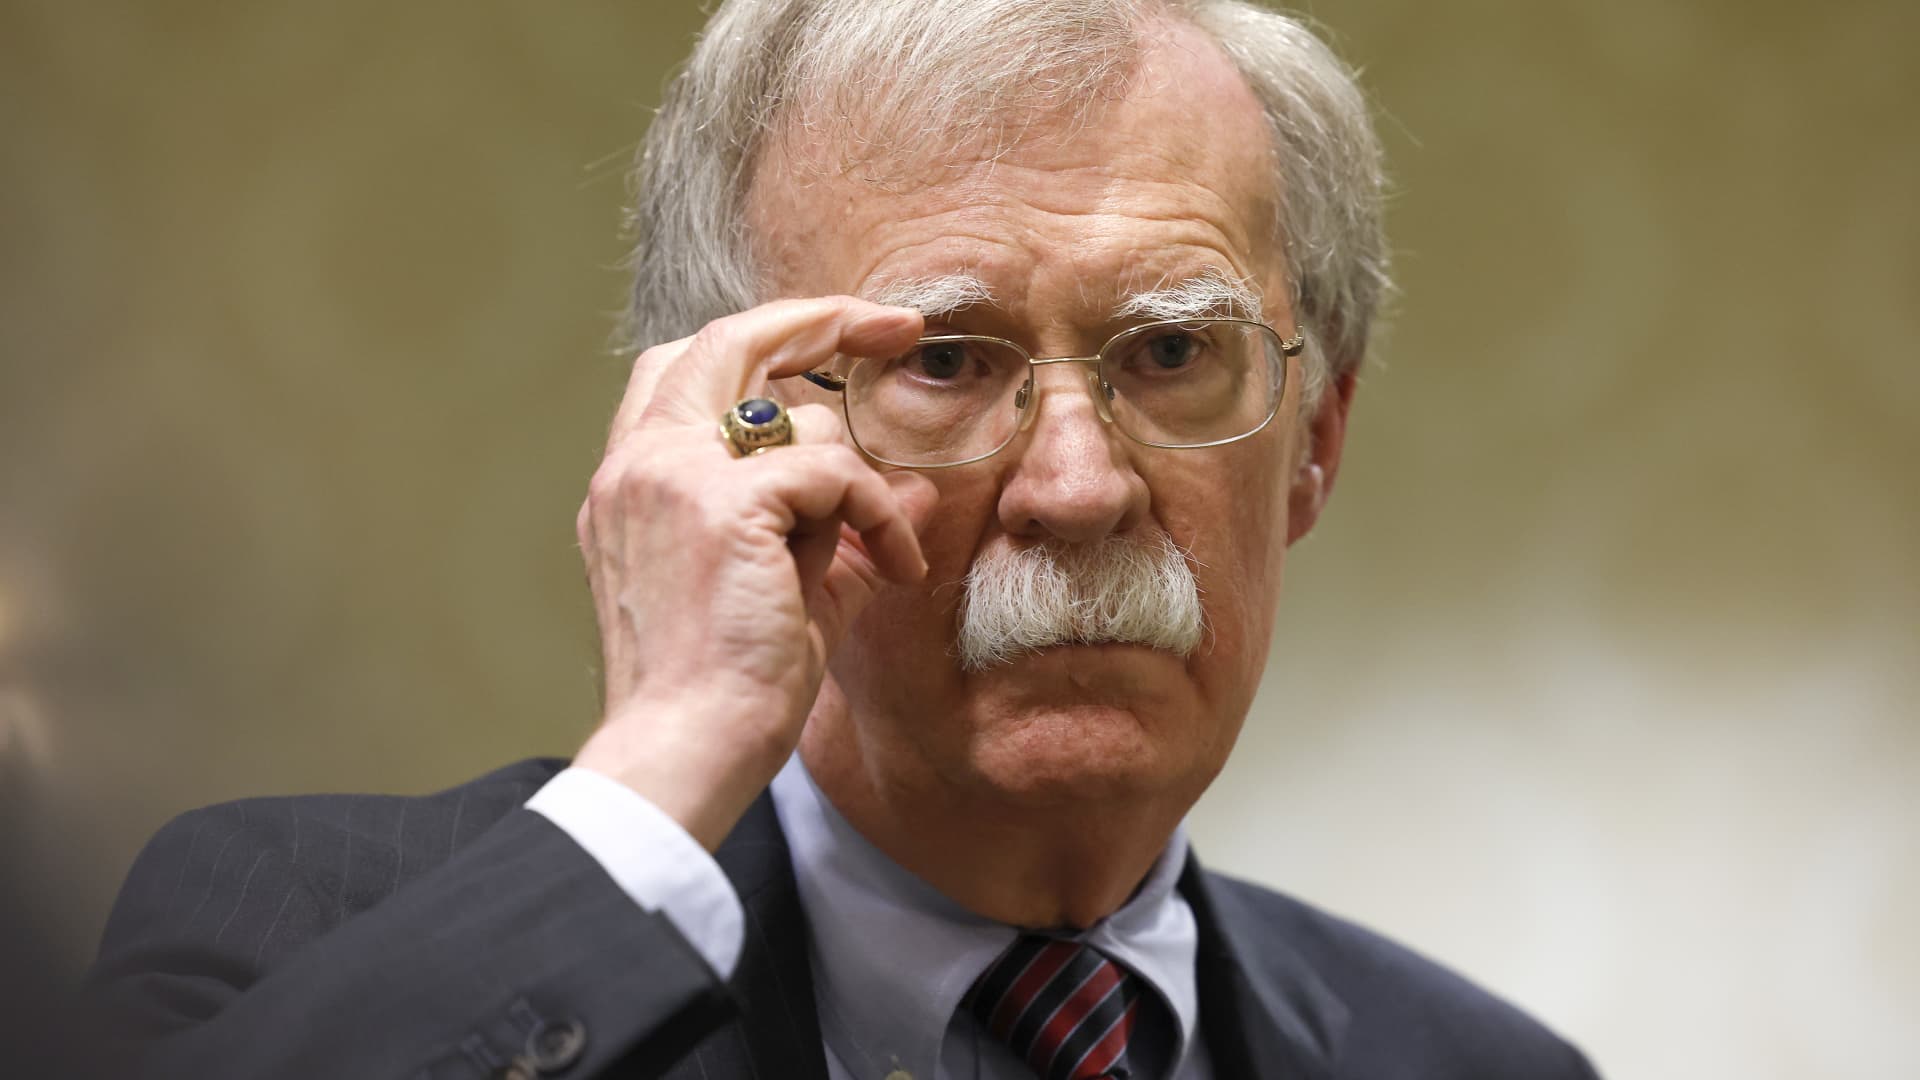 Previous Trump national stability advisor John Bolton states he is contemplating 2024 presidential bid